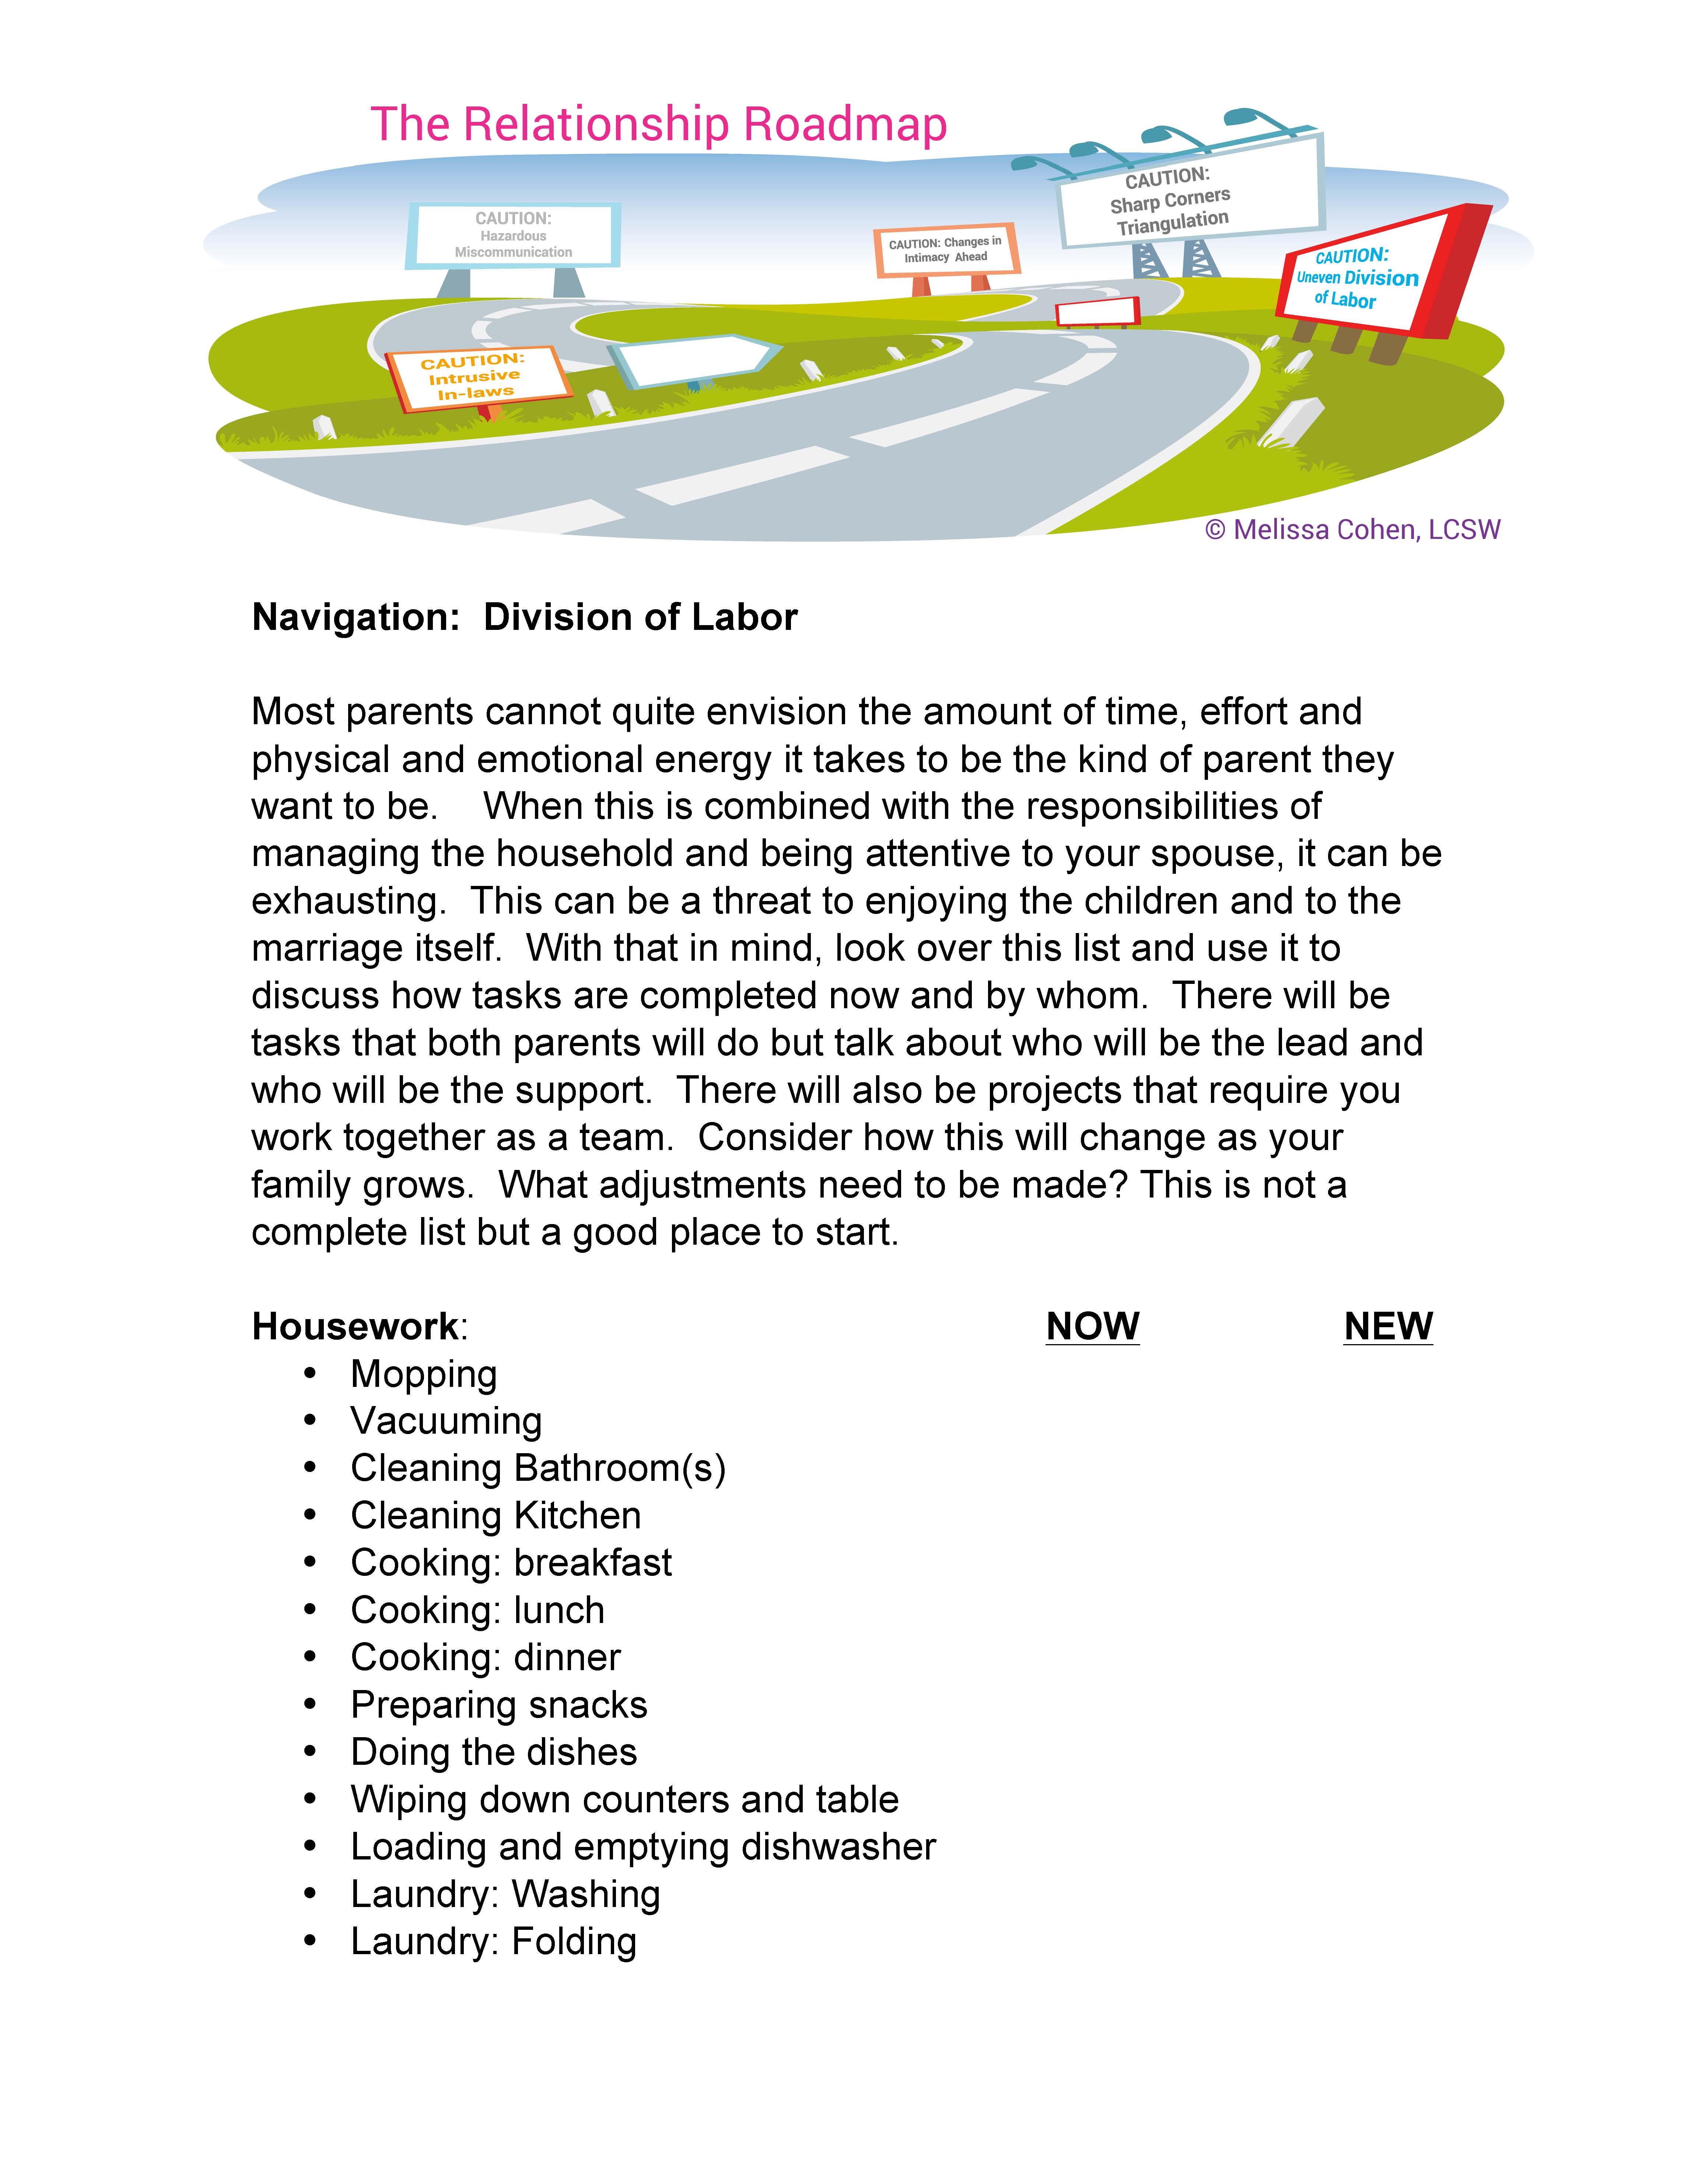 Navigation_Division of Labor_Page_1